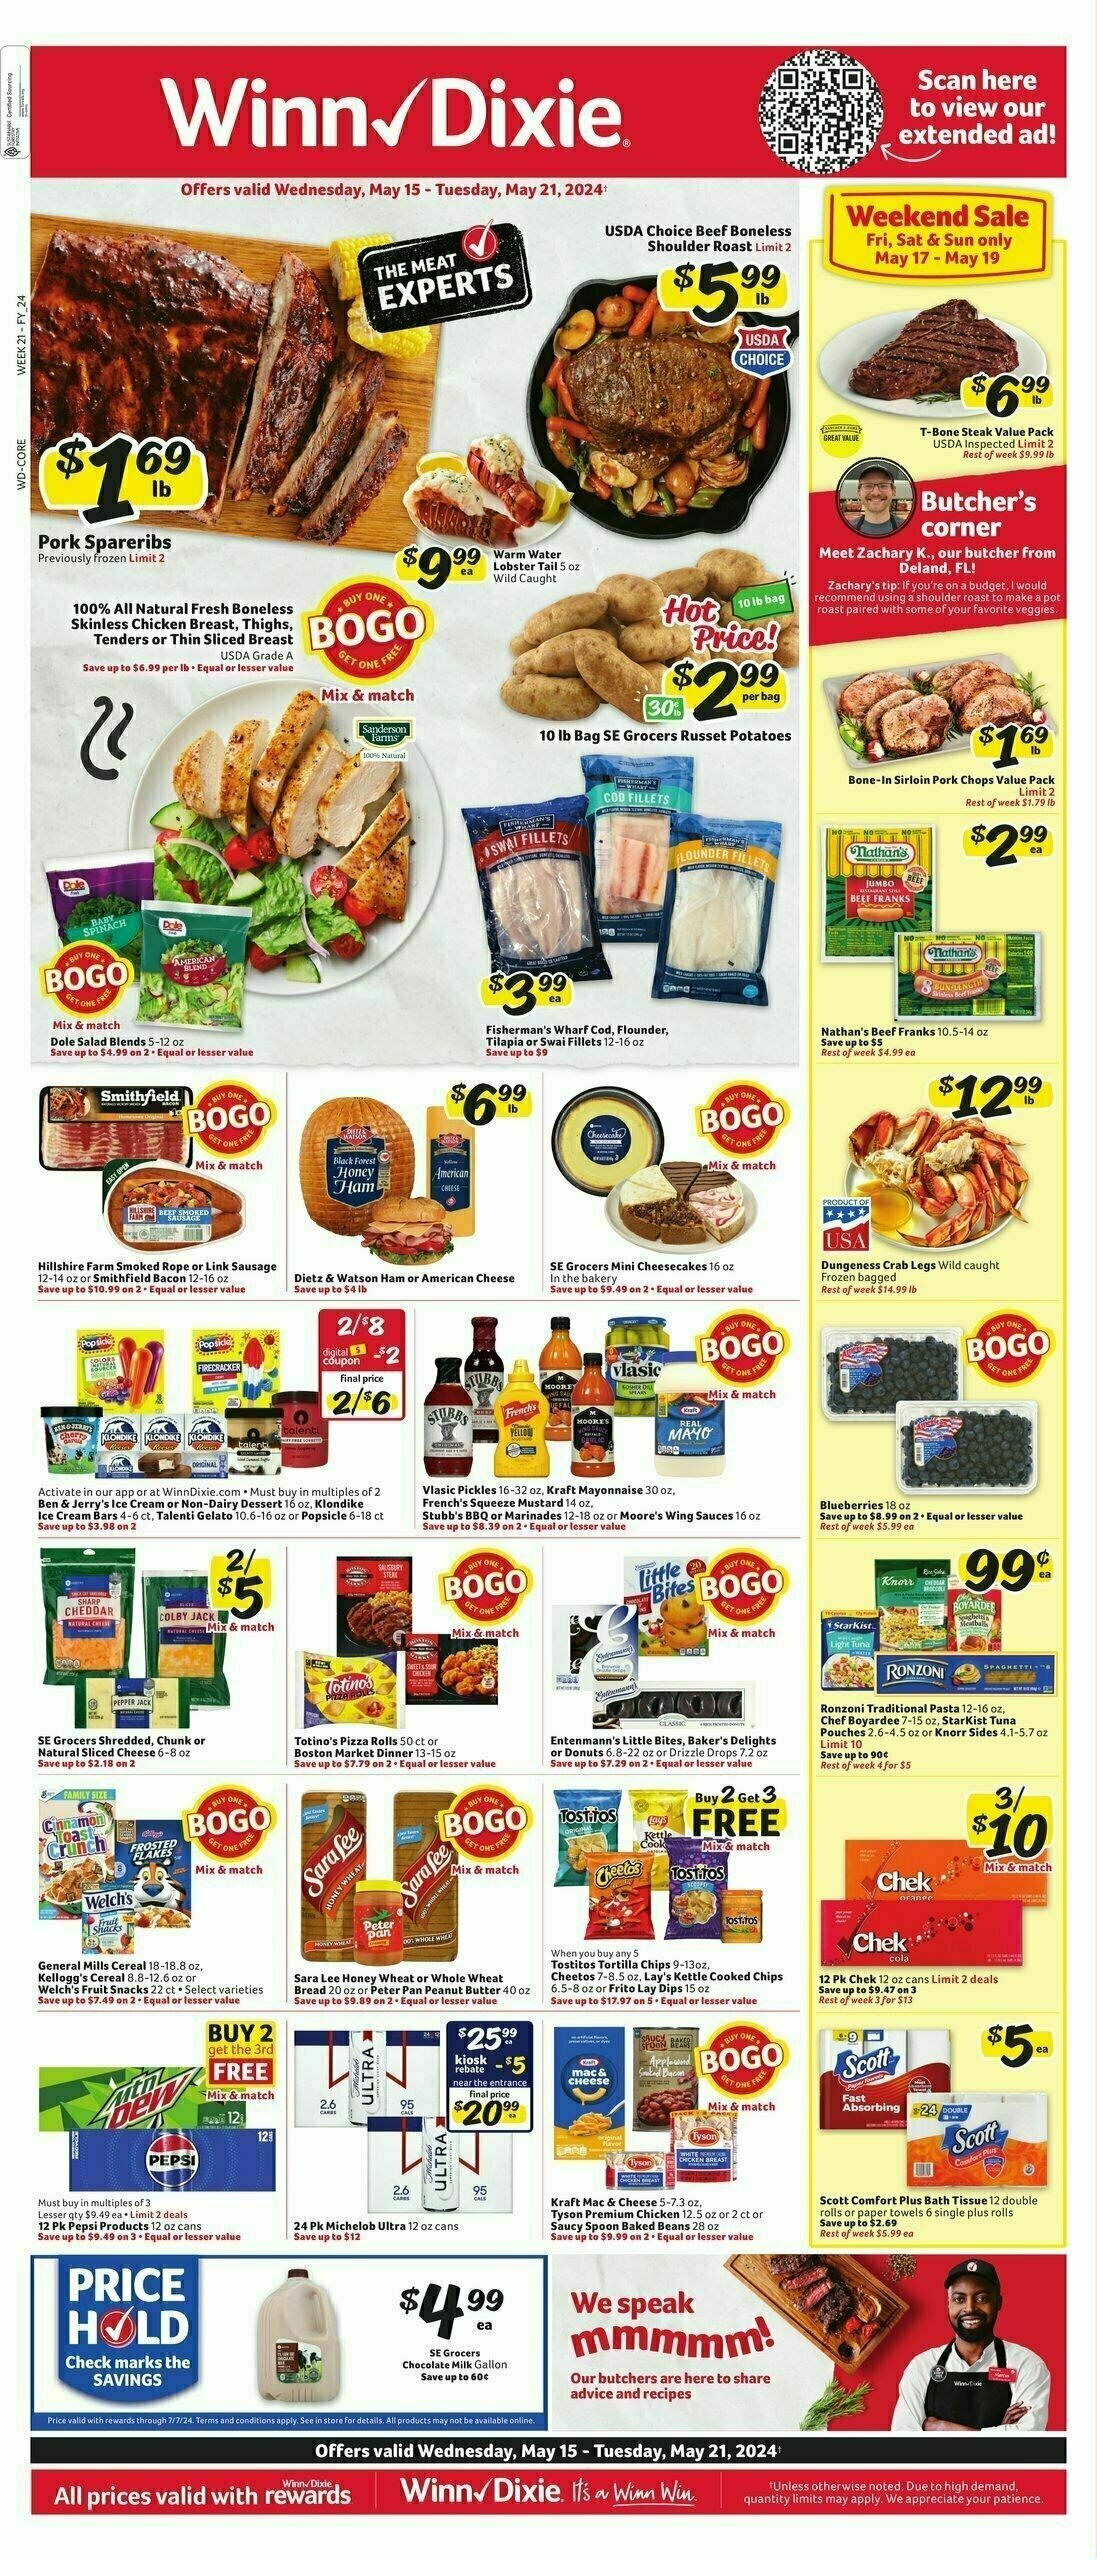 Winn-Dixie Weekly Ad from May 15